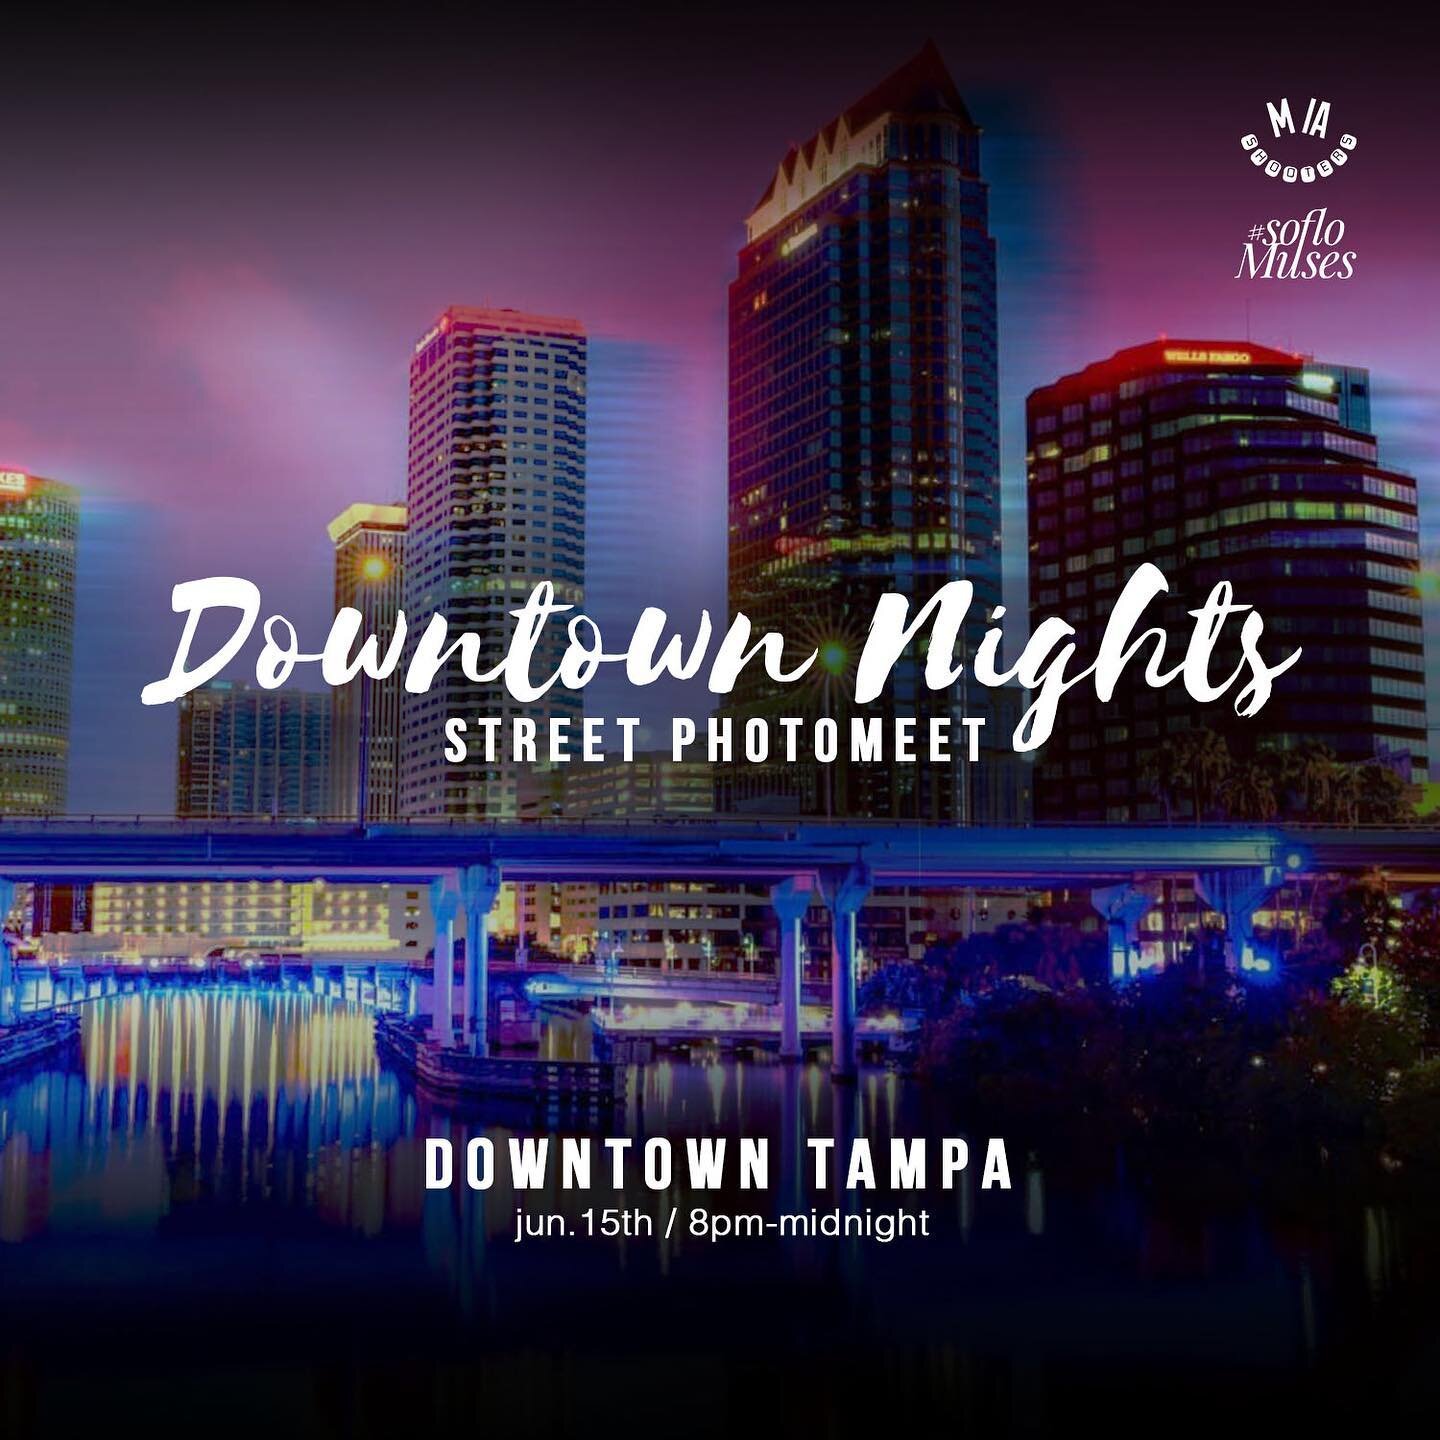 📸Up Next: #DowntownNightsTPA ✨📸
.
Cinematic nighttime vibes enhanced by RGB lighting with invited models! Let&rsquo;s take over Downtown #Tampa! 📸 Hosted by @dirtylen5 of @MIAShooters!
.
#downtownnights #soflomuses #miashooters #streetphotography 